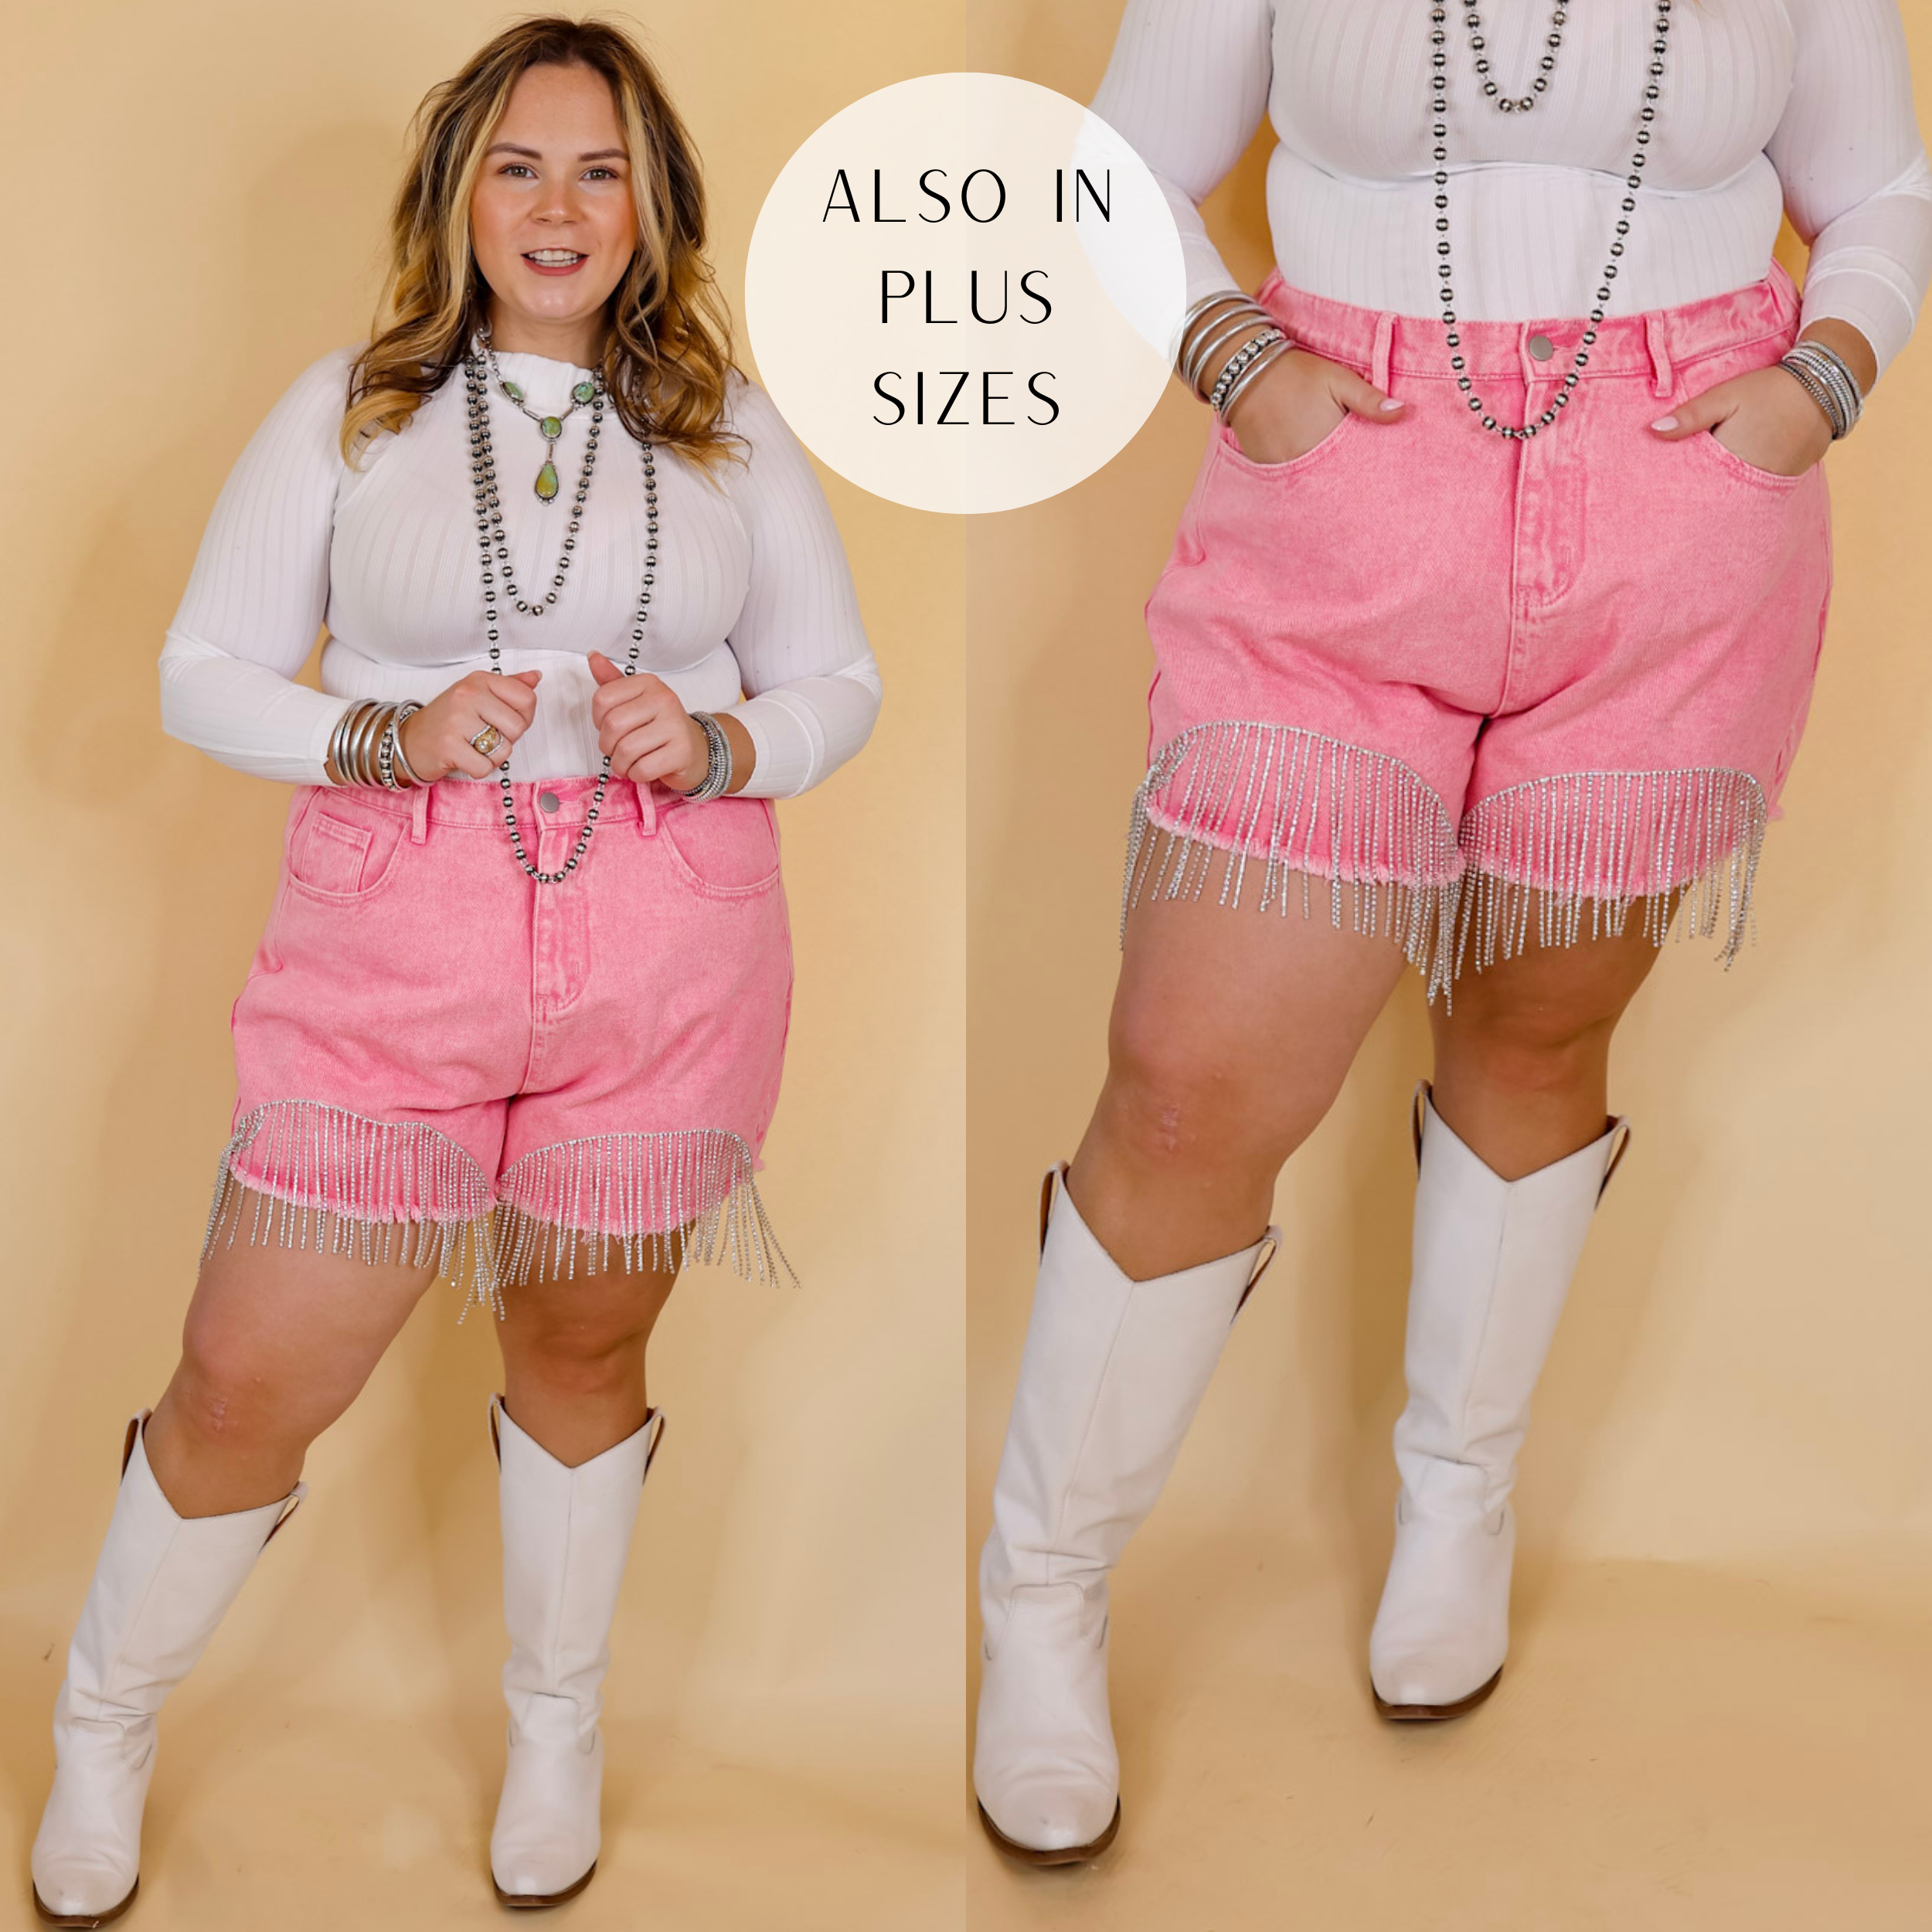 Model is wearing distressed denim shorts with crystal fringe along the bottom hem in pink. Model has these shorts paired with a white long sleeve top, white boots, and silver Navajo jewelry. Background is solid tan. 